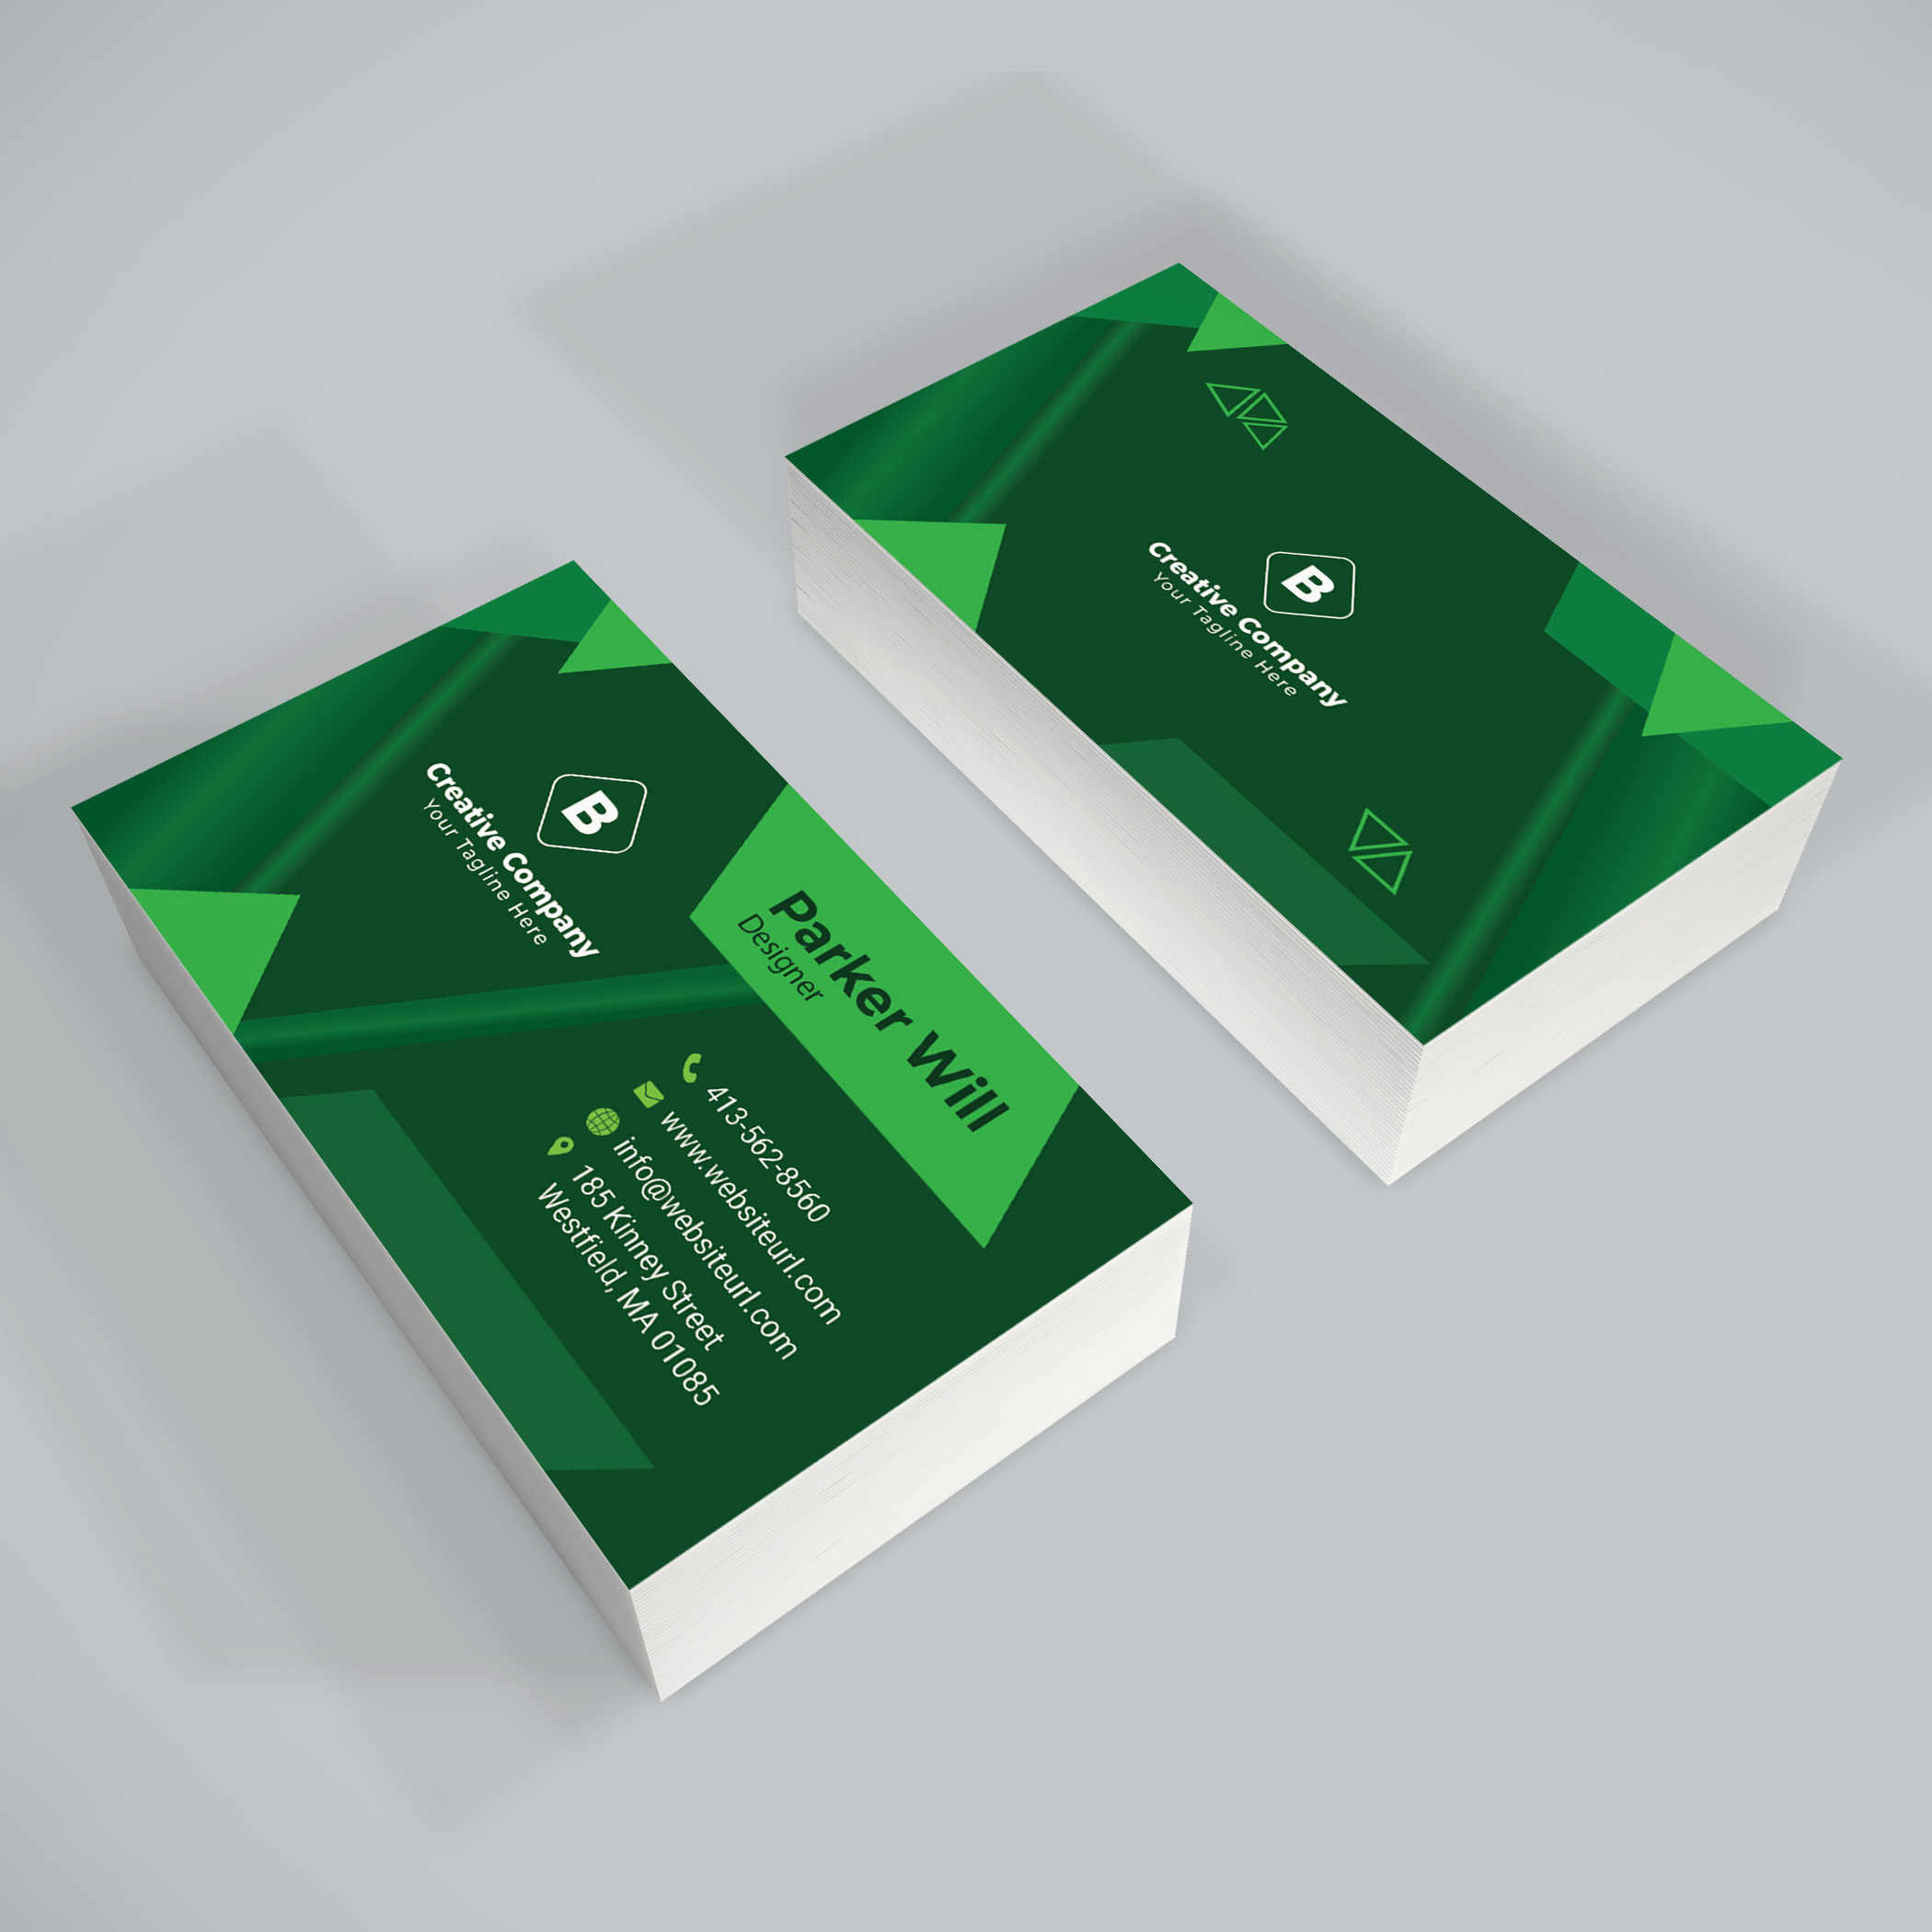 4 Corporate Business Cards Bundle, for your corporate style.